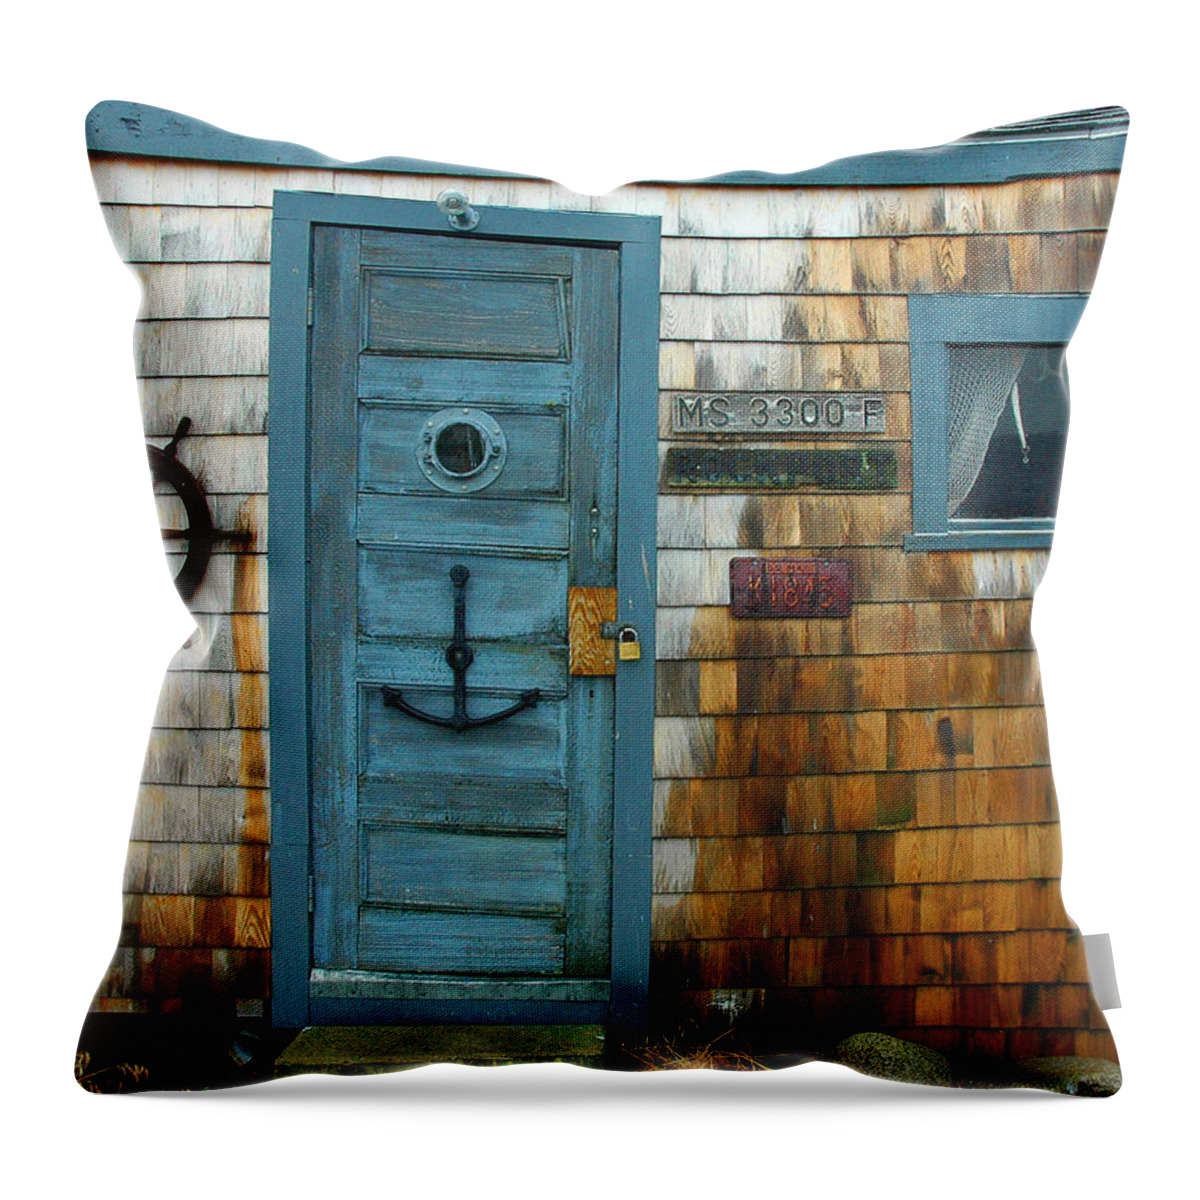 Rockport Throw Pillow featuring the photograph Fishing Hut at Rockport Maritime by Jon Holiday